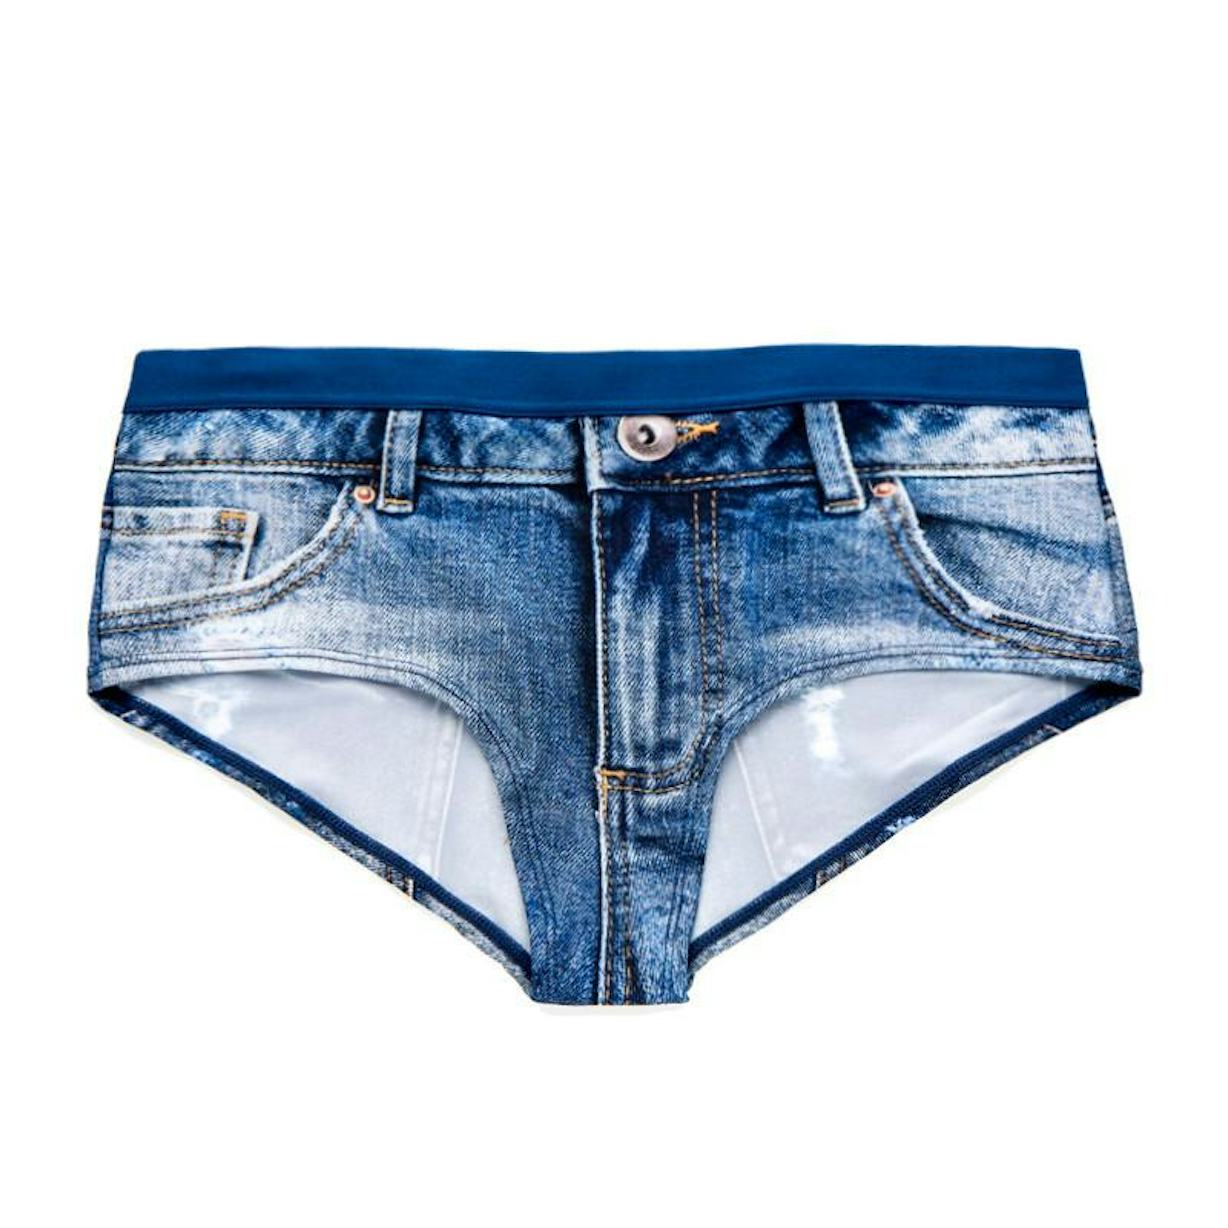 These Underwear Look Exactly Like Jeans... Or Are They Jeans That Look ...